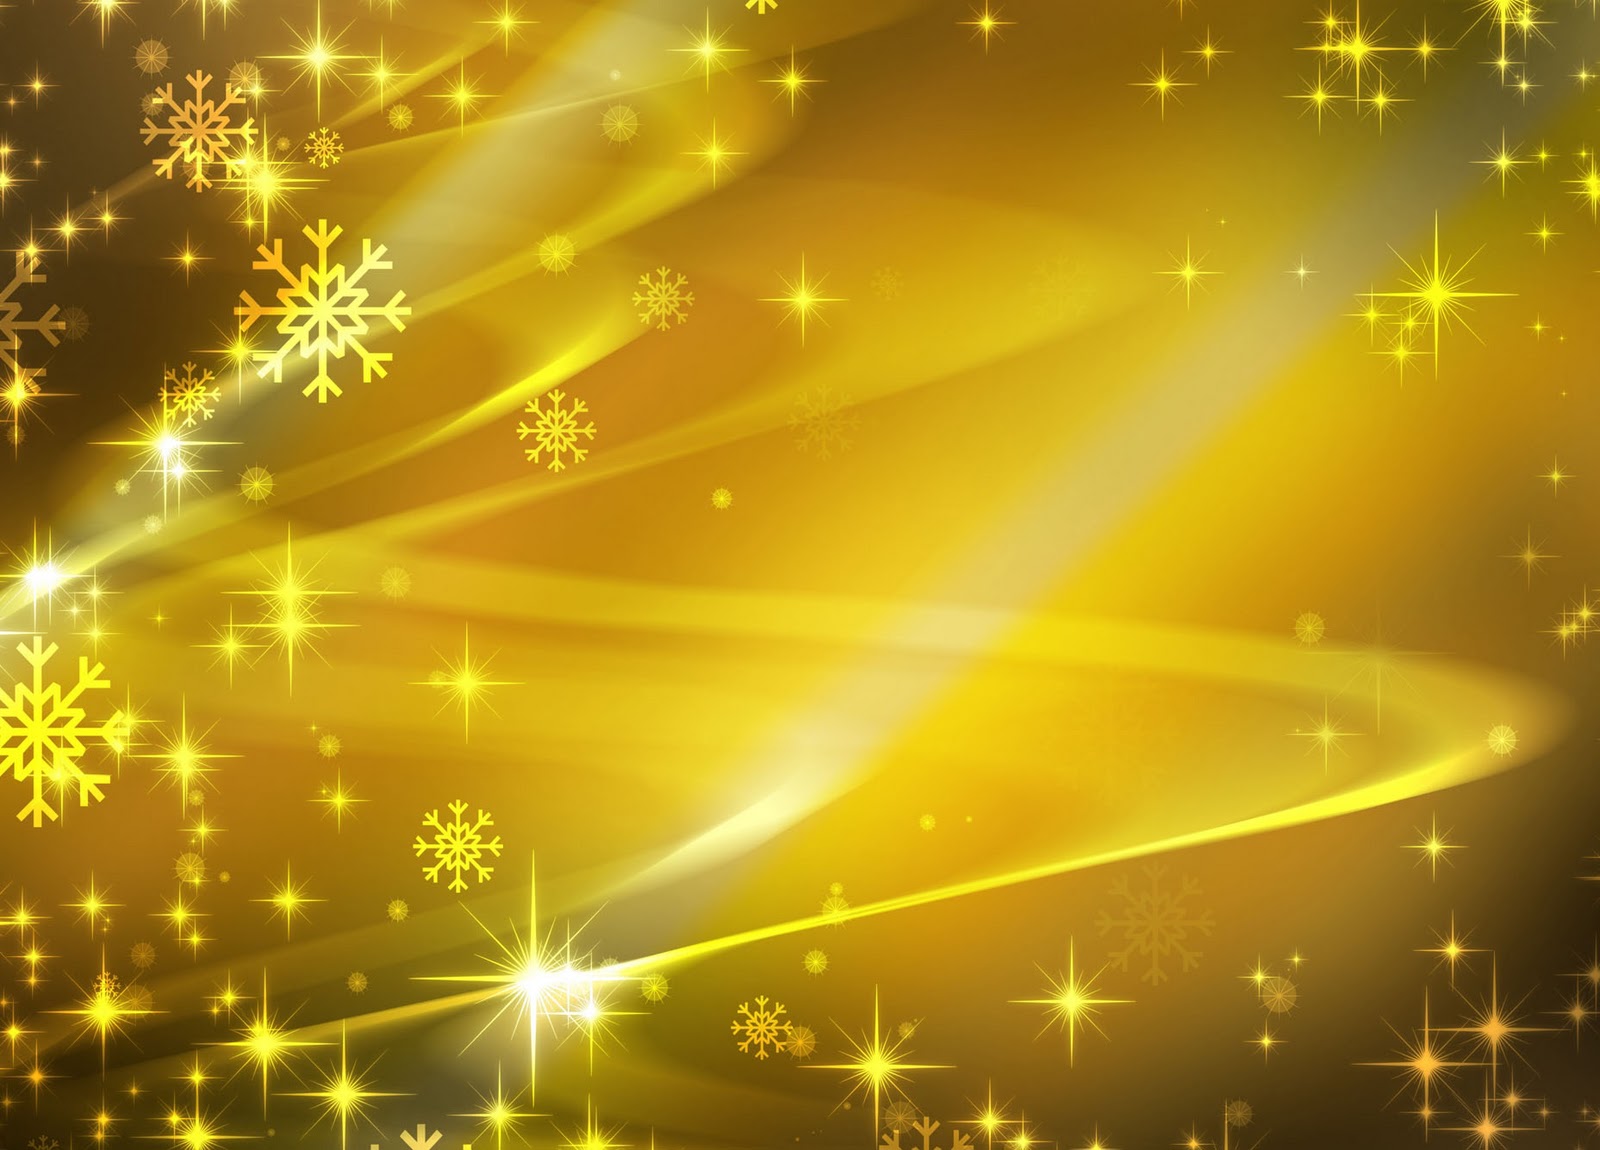 Christmas Backgrounds 8193 Hd Wallpapers in Celebrations   Imagesci